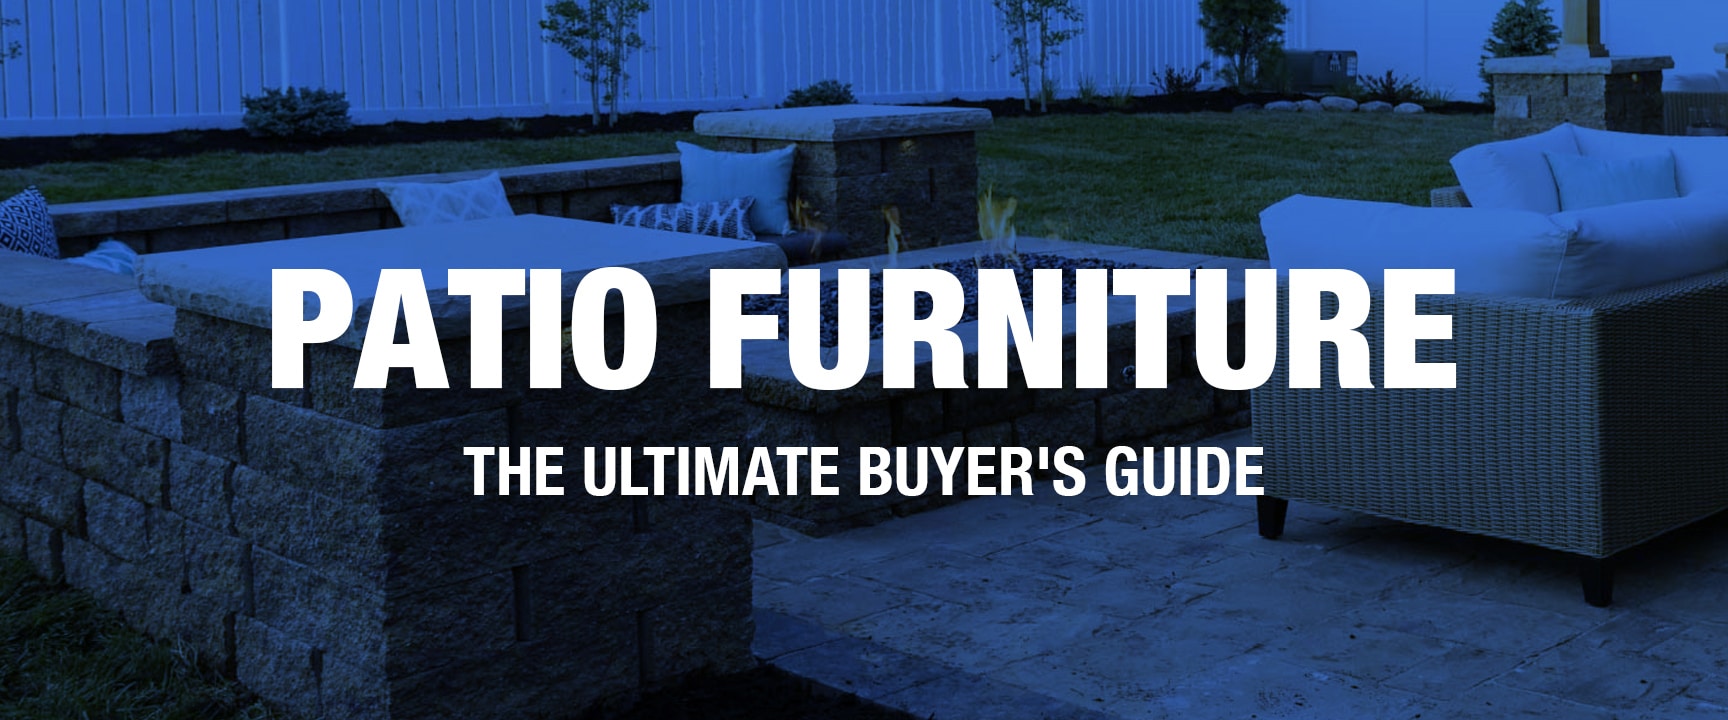 Patio Furniture Buyer’s Guide